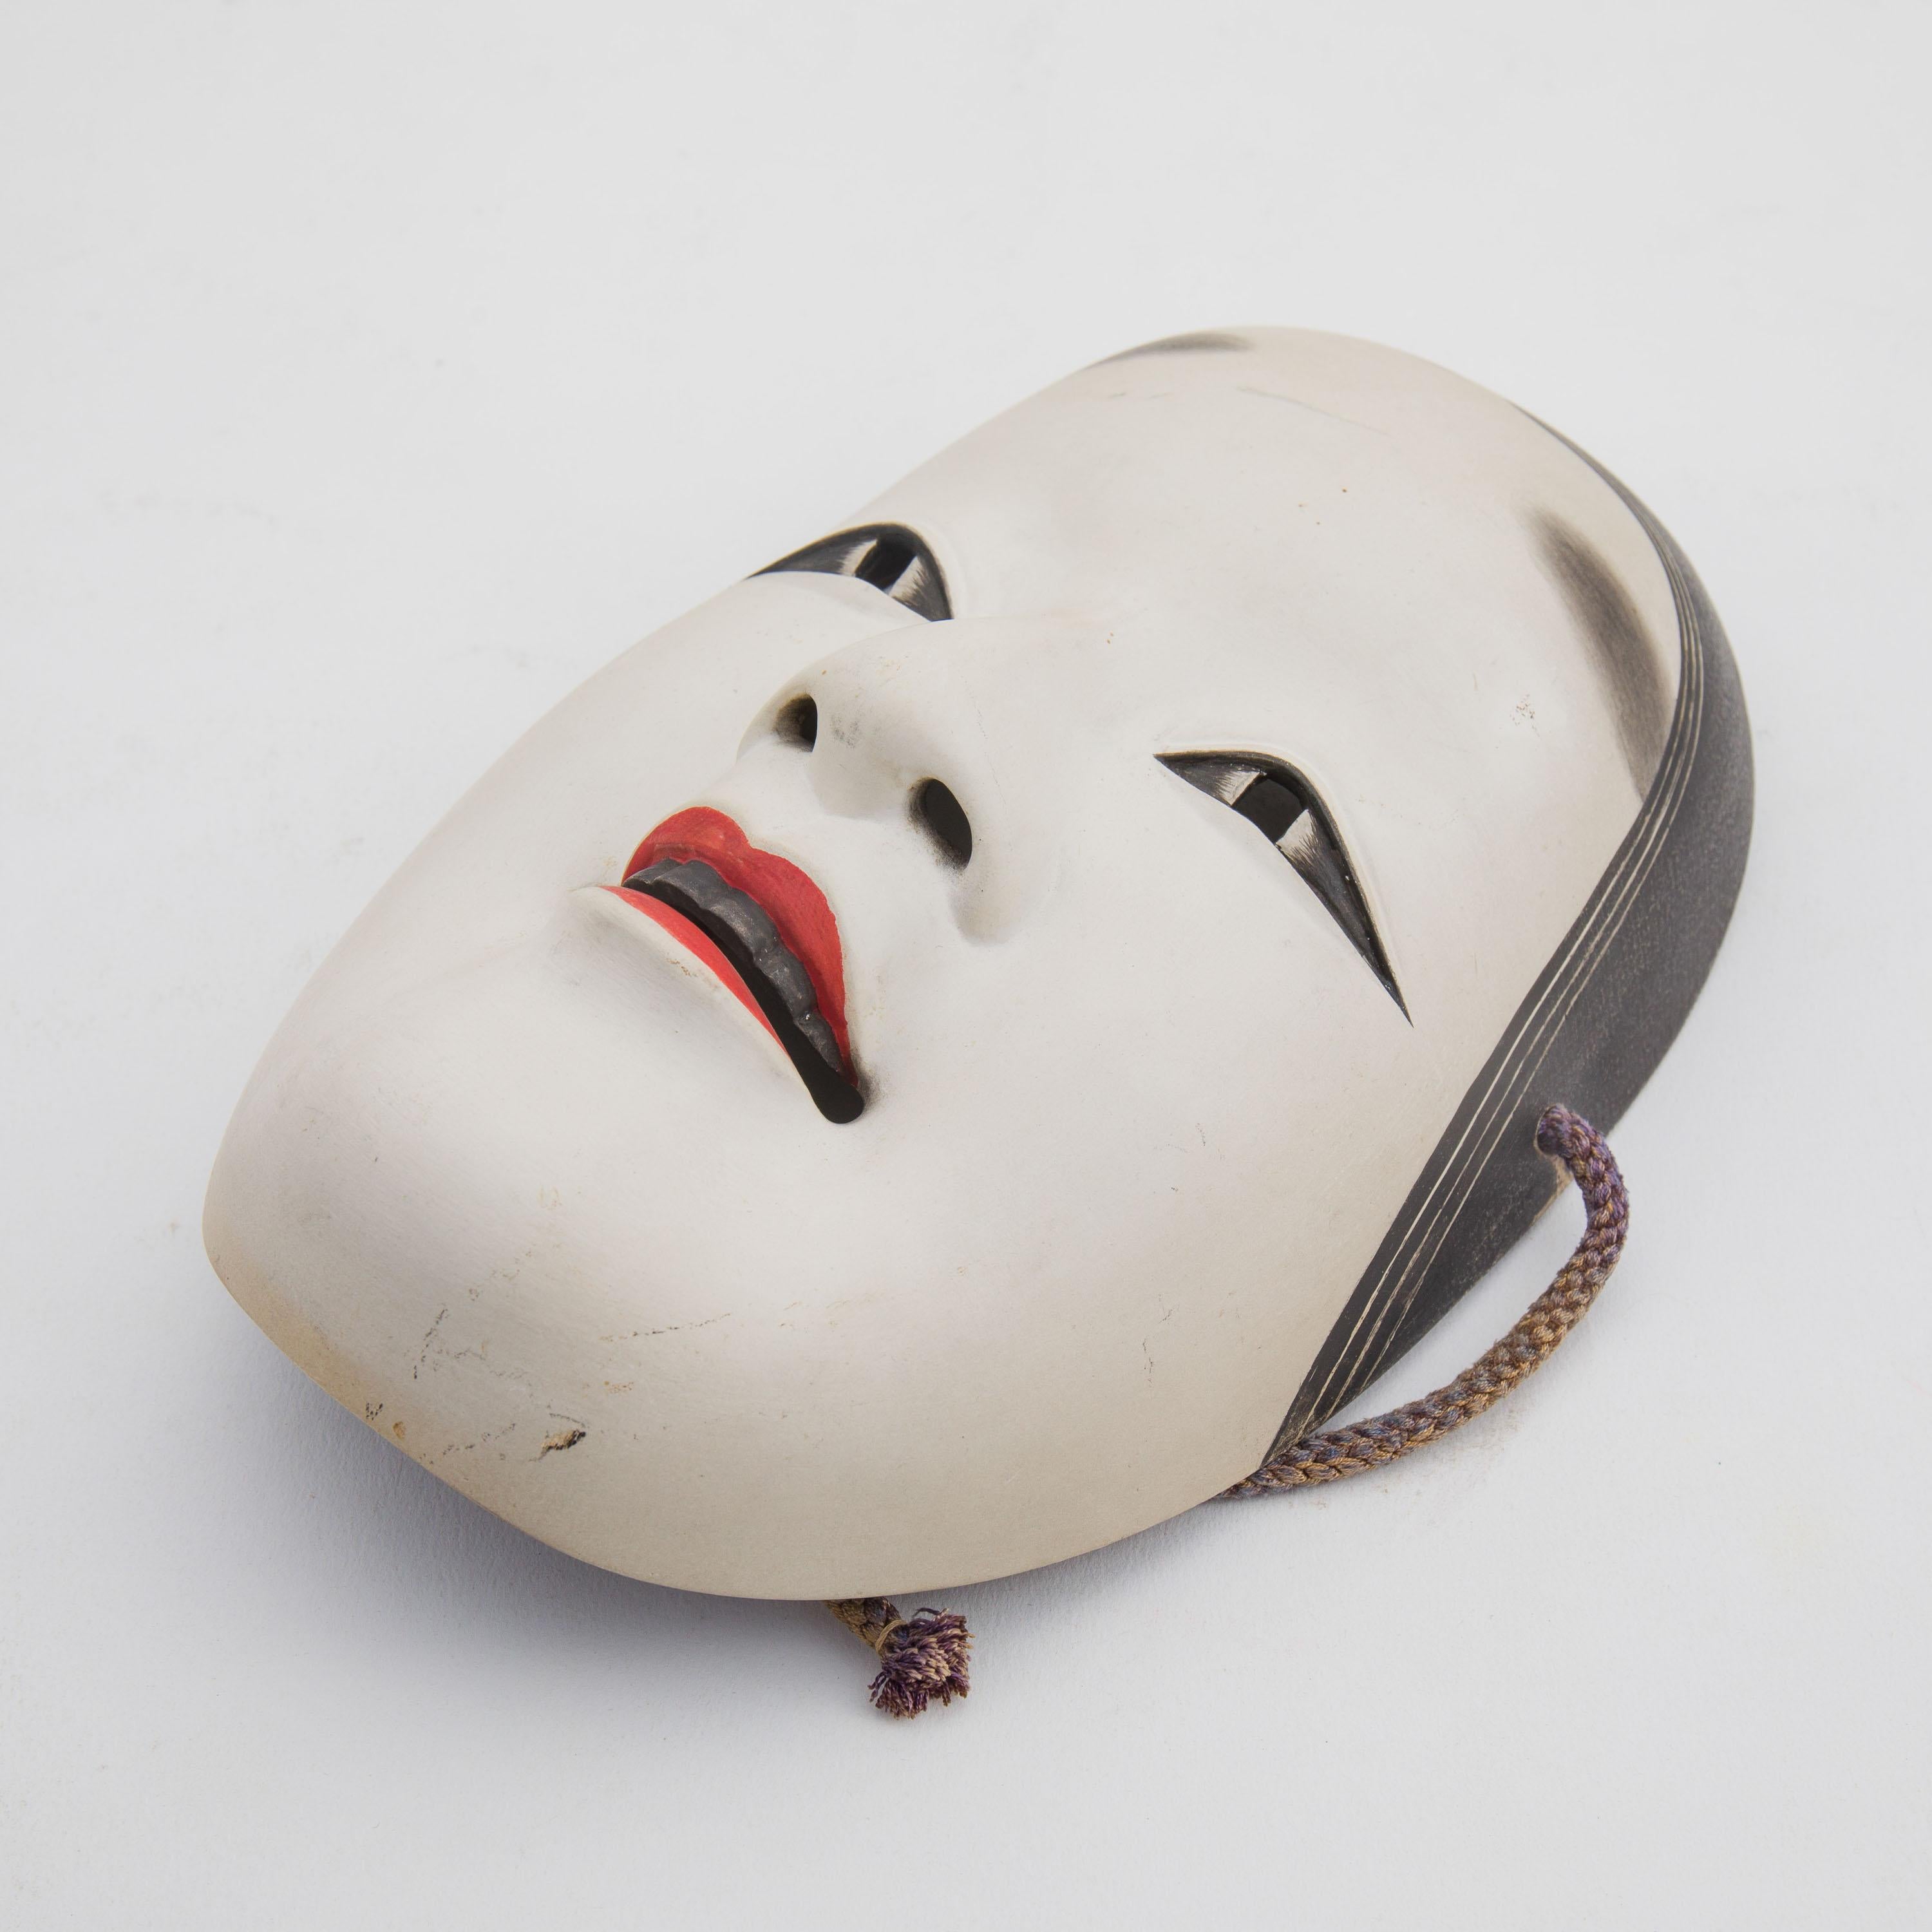 An antique hand-carved and hand-painted Japanese Noh theatre mask, depicting a young female character (onna men). Noh Masks have been described as being like 